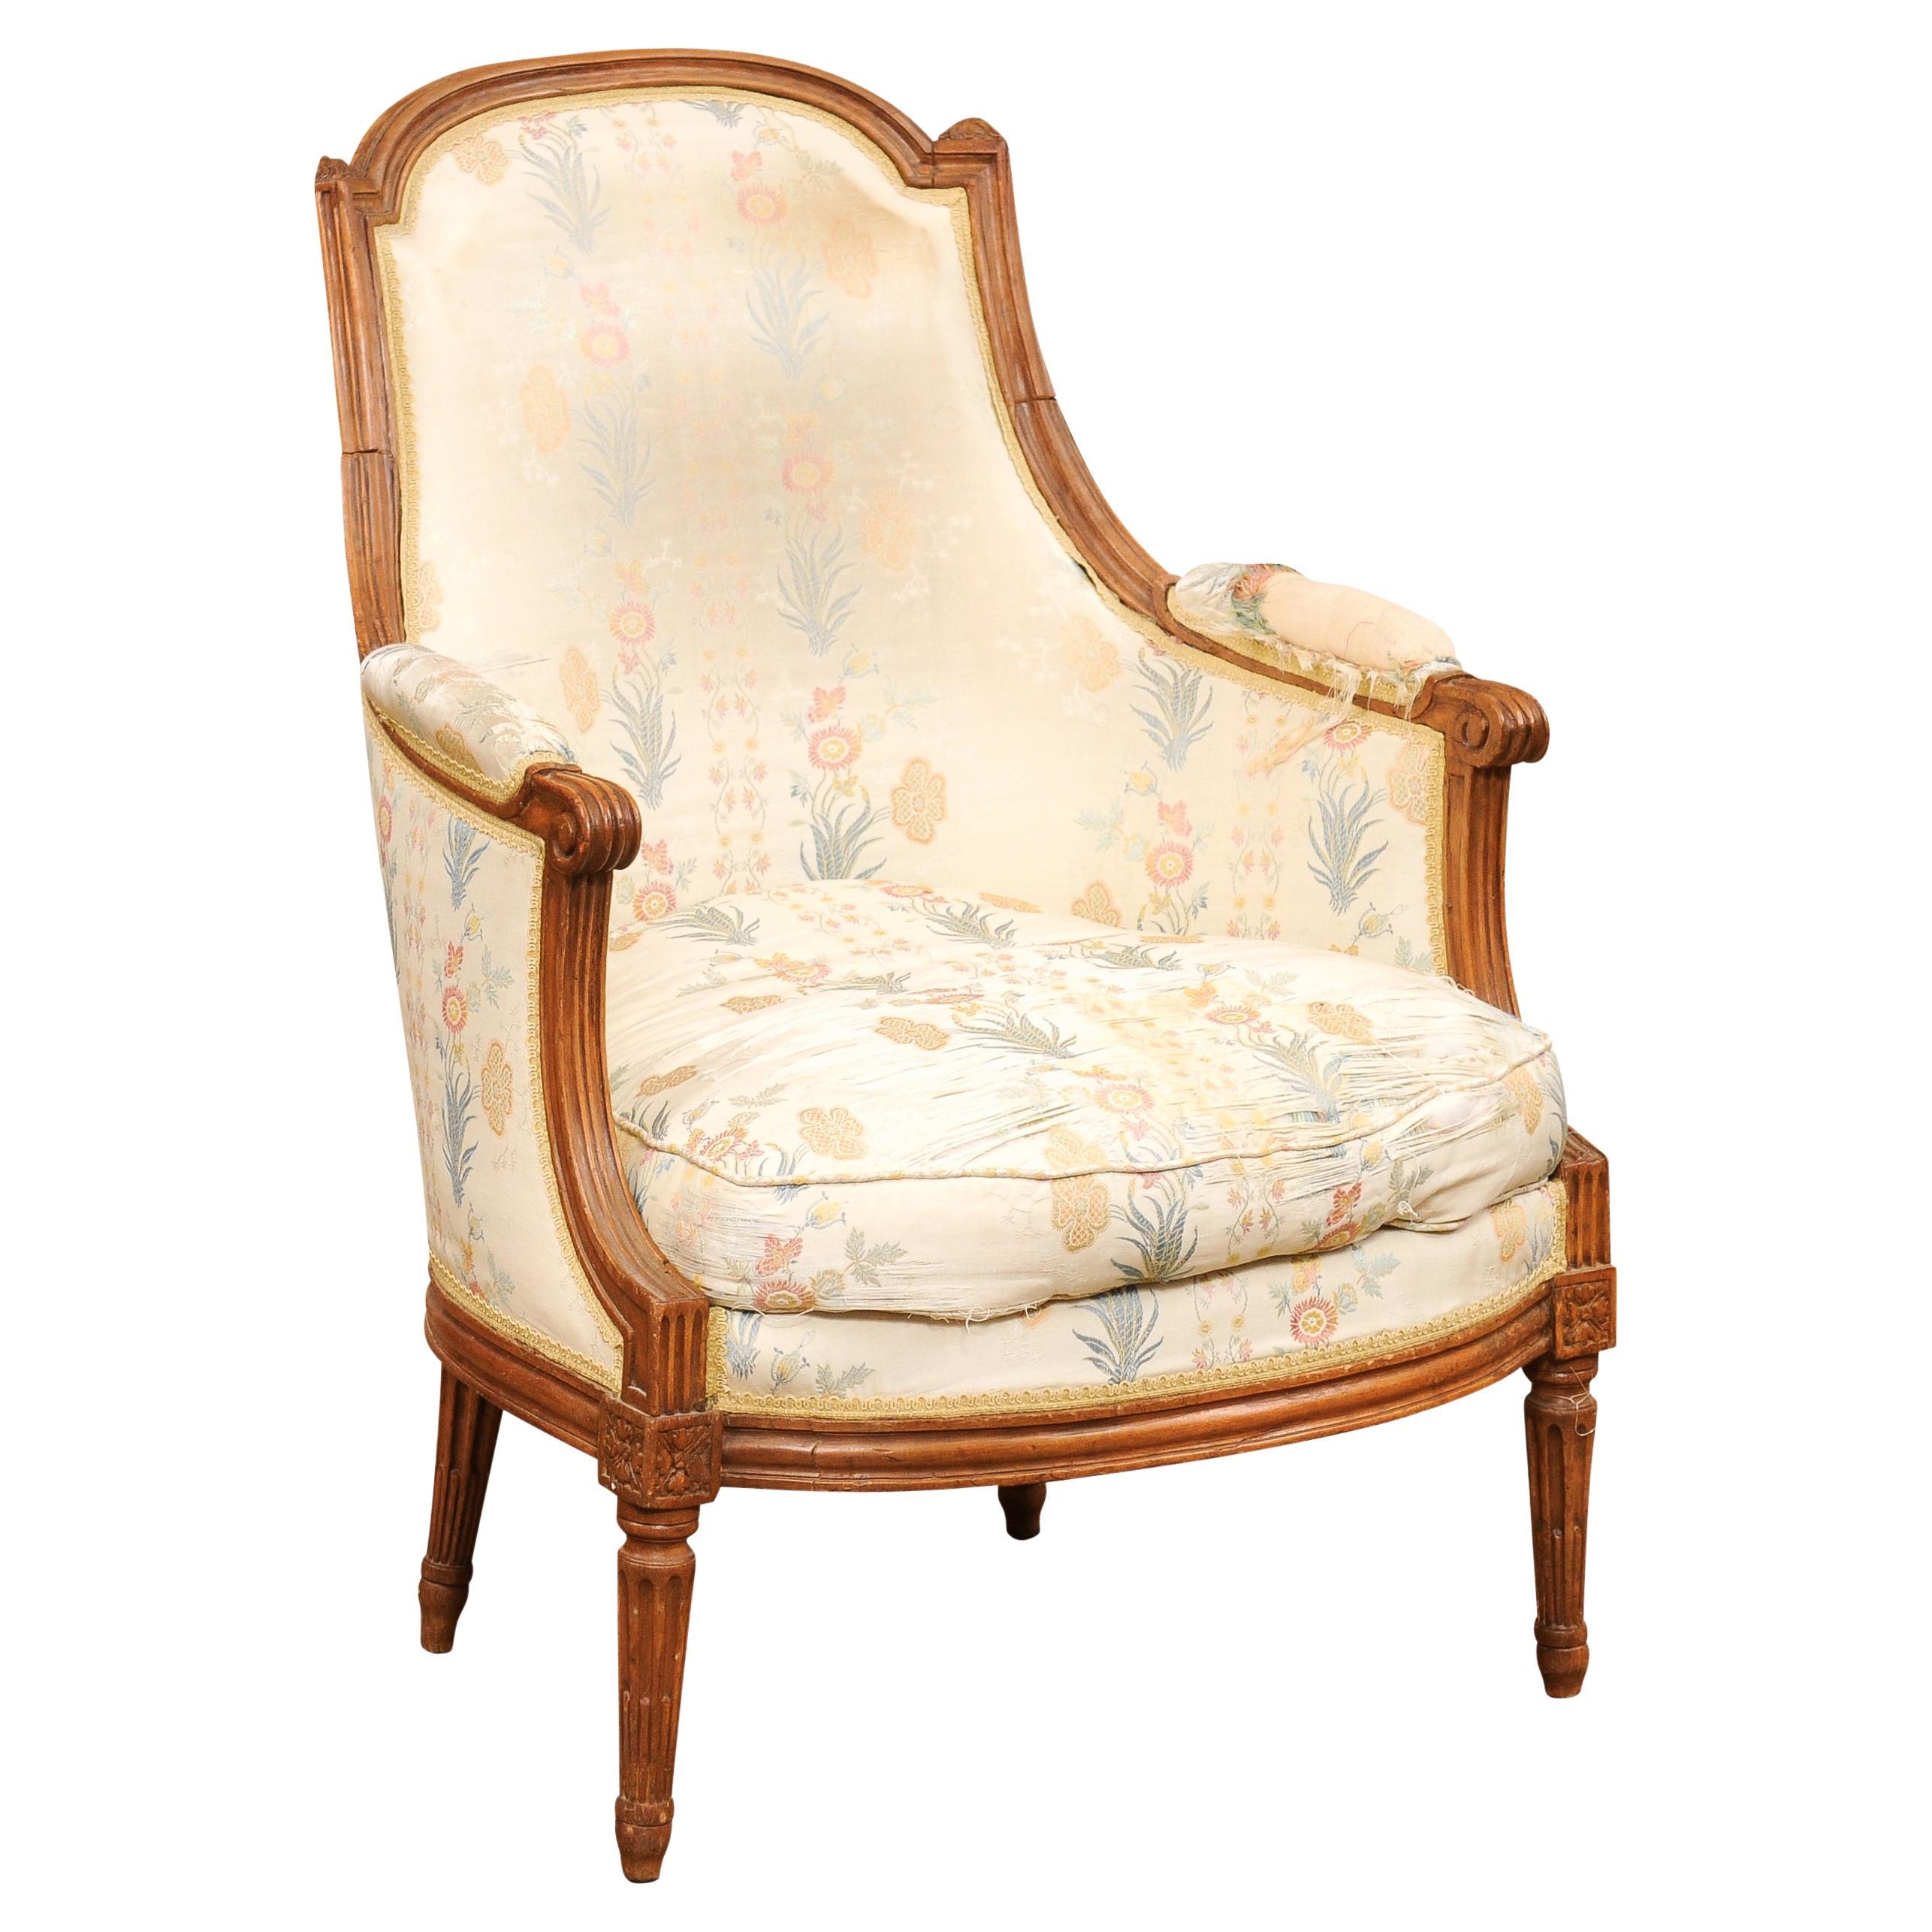 French Louis XVI Period Late 18th Century Walnut Bergère Chair with Curving Back For Sale